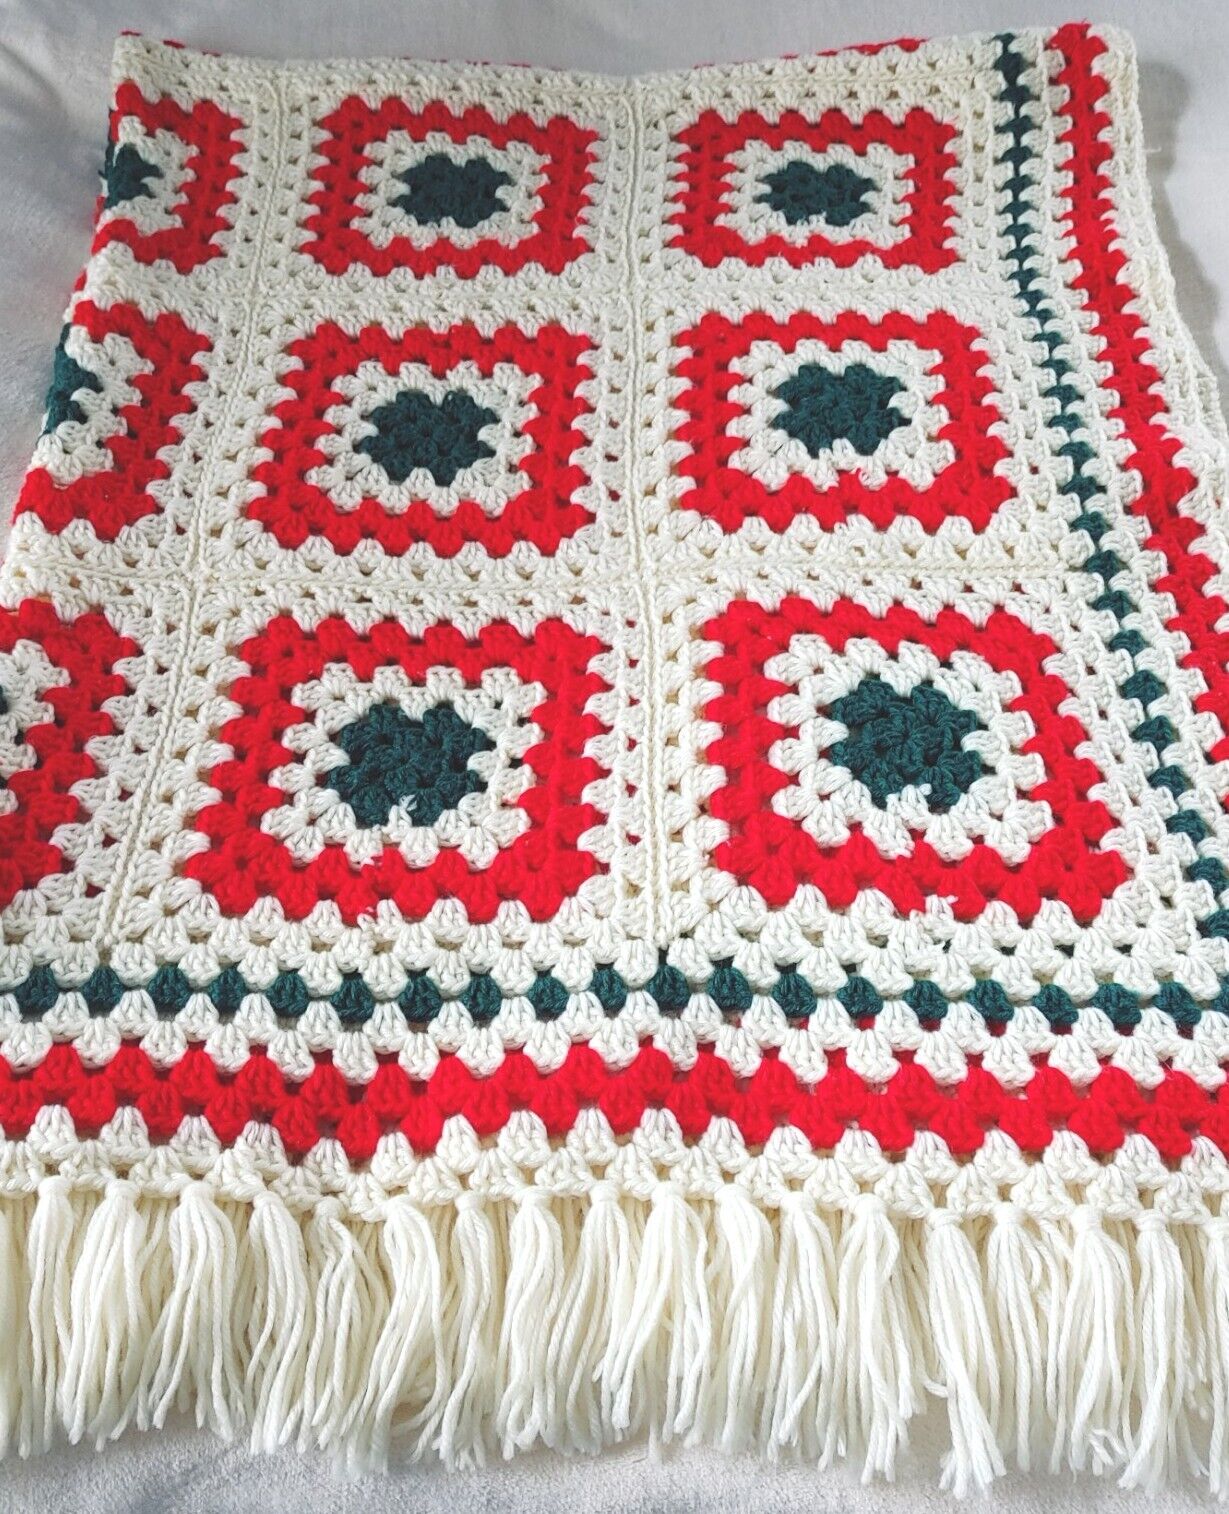 Vintage Crochet Granny Square Blanket Afghan With Tassels Red Green Ivory